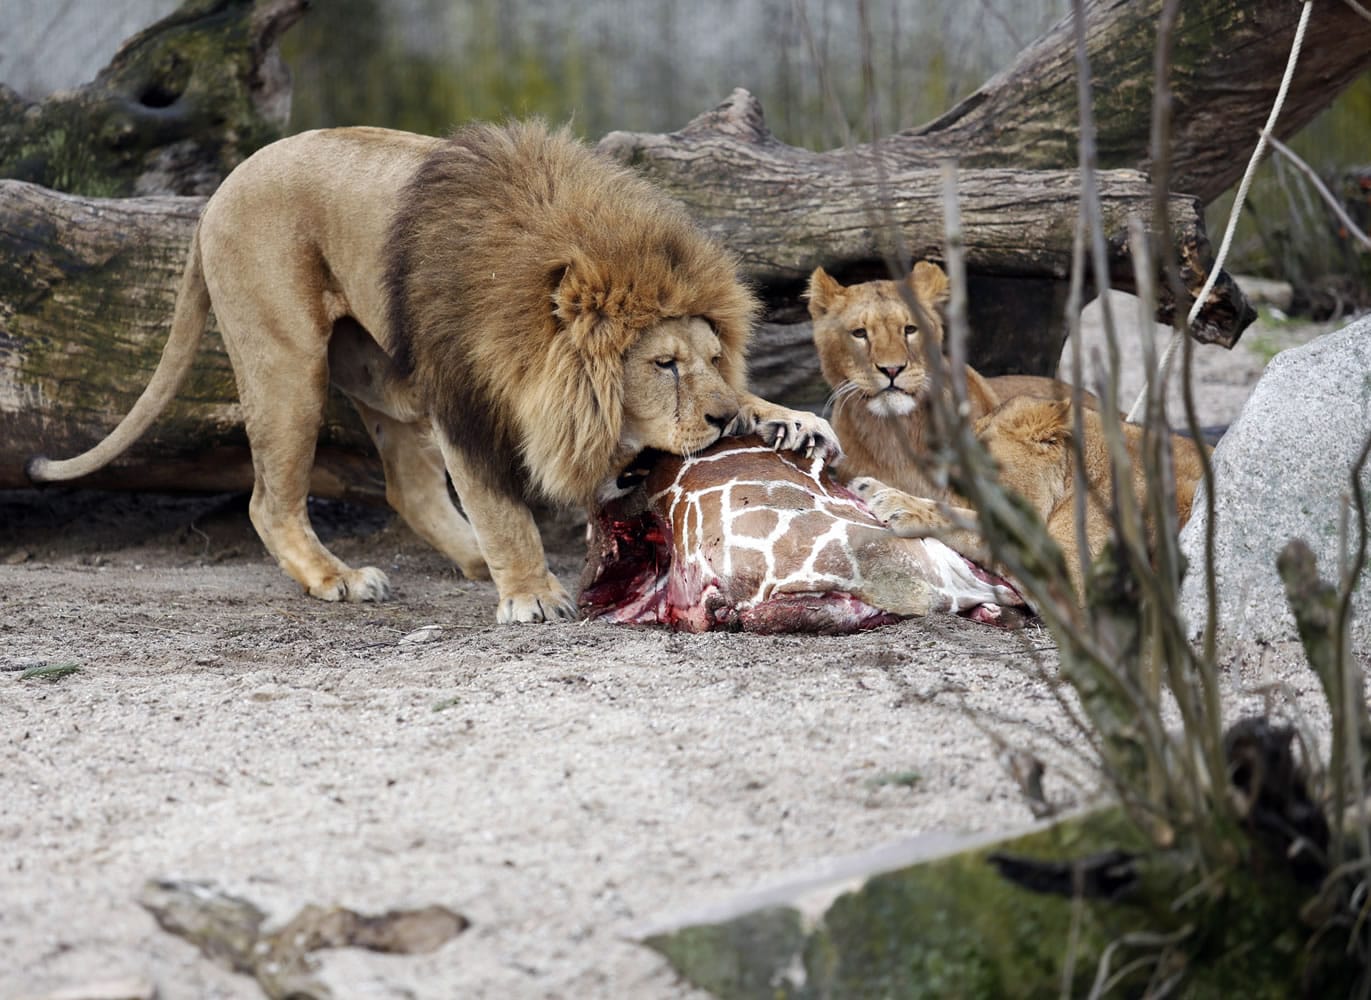 The carcass of Marius, a male giraffe, is eaten by lions after he was put down in Copenhagen Zoo on Sunday. Copenhagen Zoo turned down offers from other zoos and $680,000 from a private individual to save the life of a healthy giraffe before killing and slaughtering it Sunday to follow inbreeding recommendations made by a European association. The 2-year-old male giraffe, named Marius, was put down using a bolt pistol and its meat will be fed to carnivores at the zoo, spokesman Tobias Stenbaek Bro said.